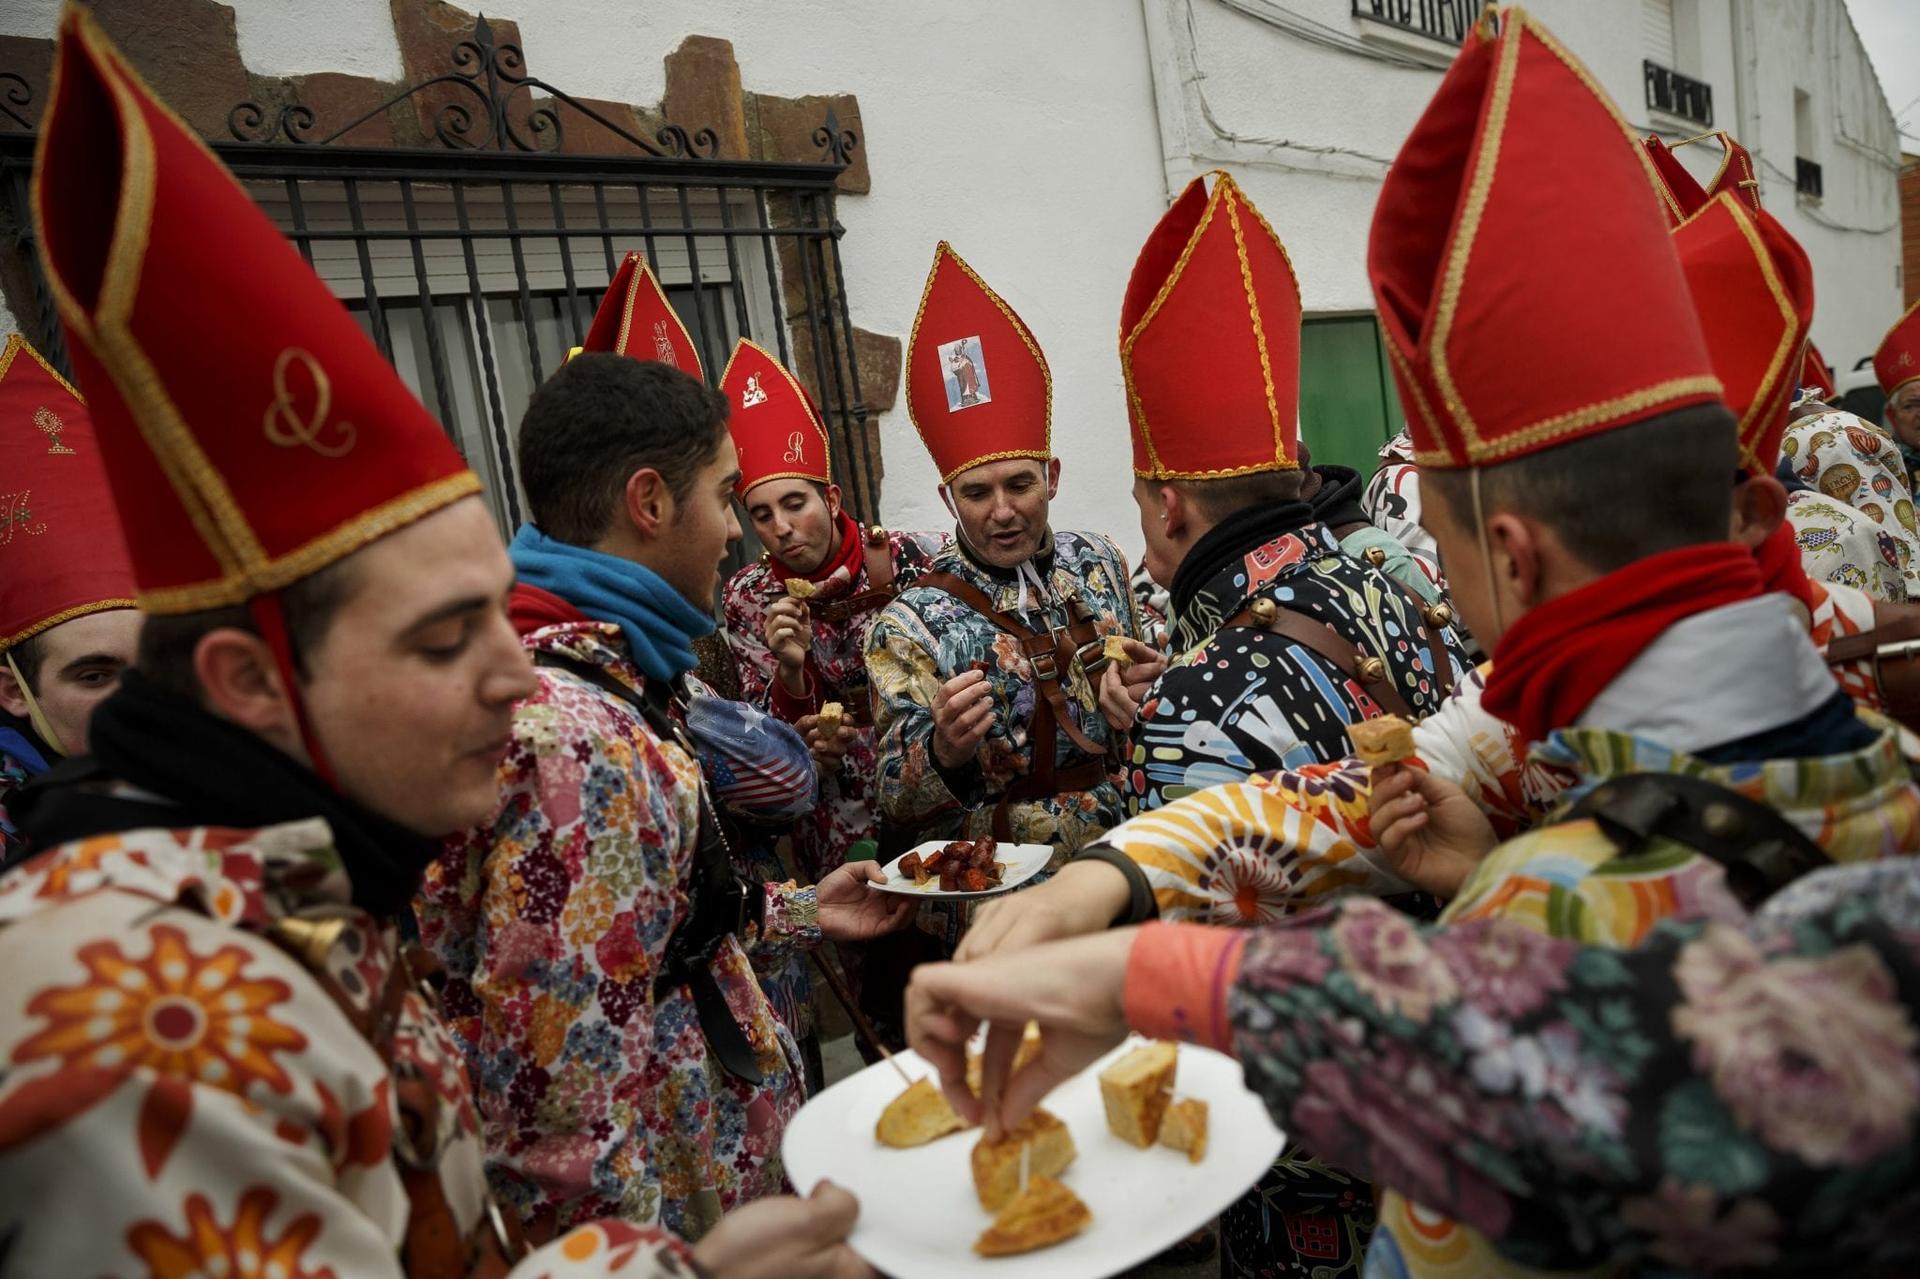 What the devil? Spaniards clang bells in religious festival